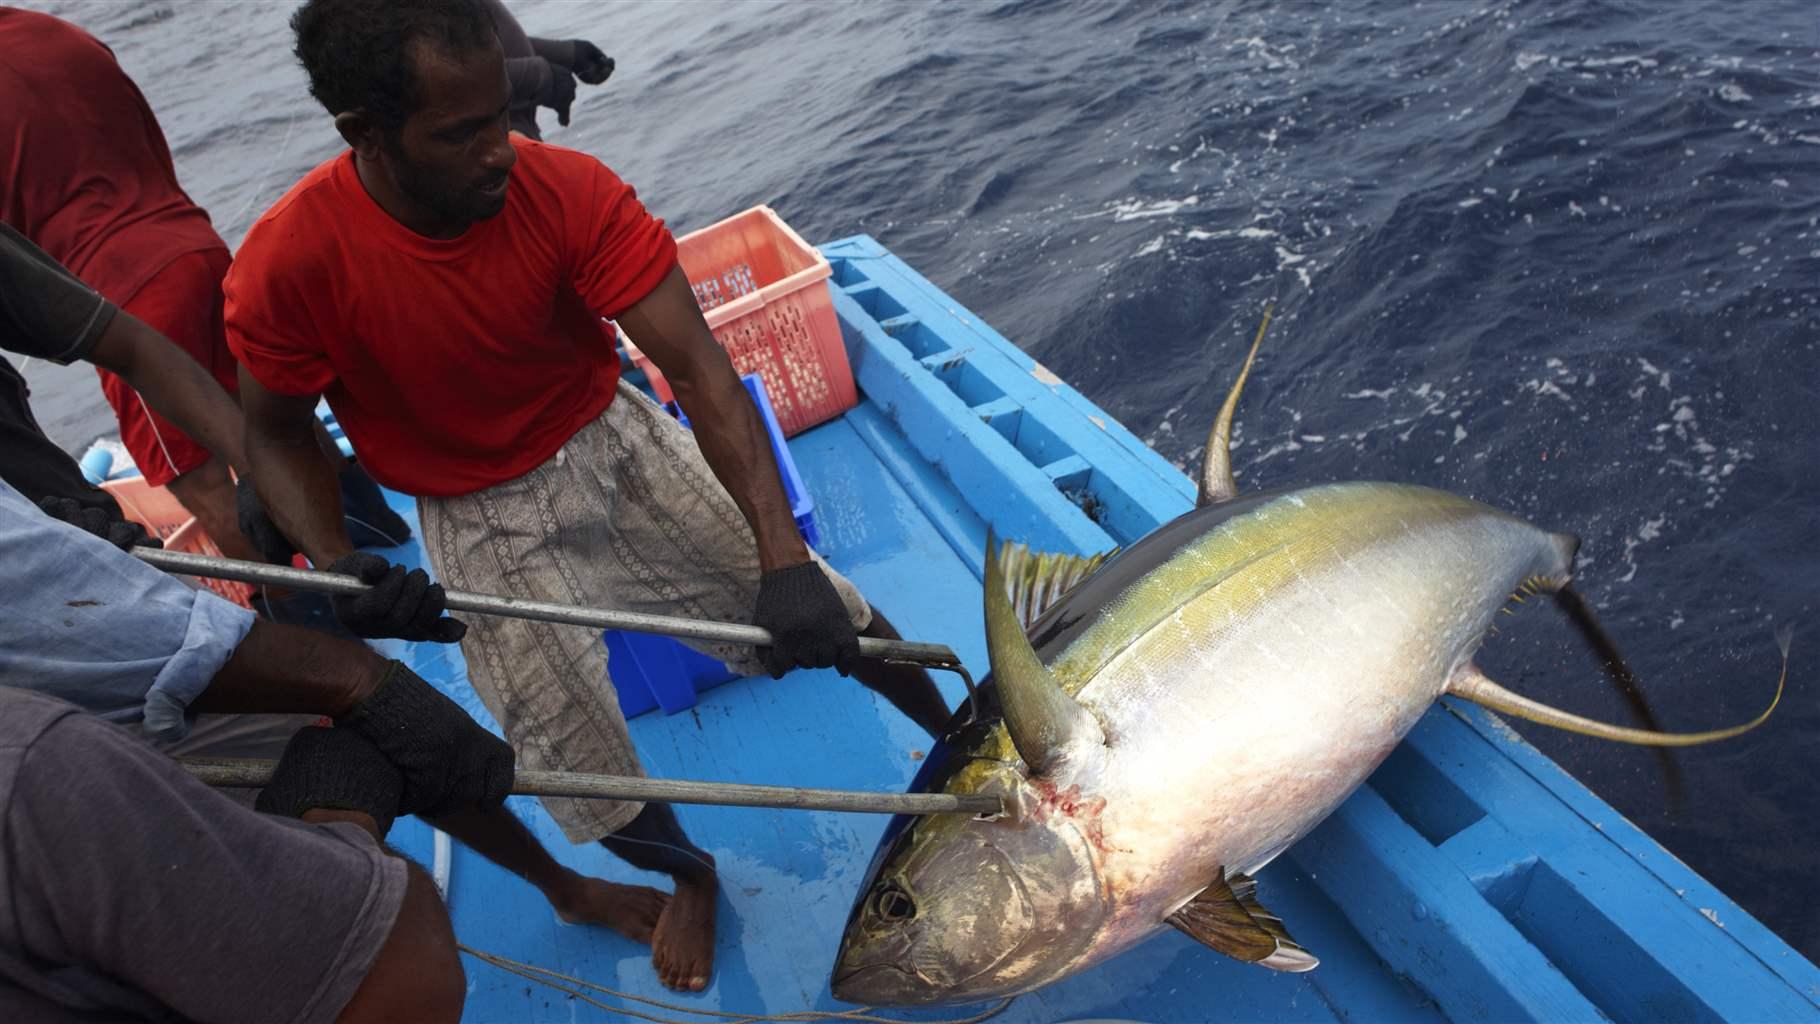 A fisher wearing a red shirt, grey striped pants, and black gloves uses a gaff to haul a large yellowfin tuna to the deck of a bright blue fishing vessel. The water is dark blue, and other men in red and blue outfits are onboard helping.